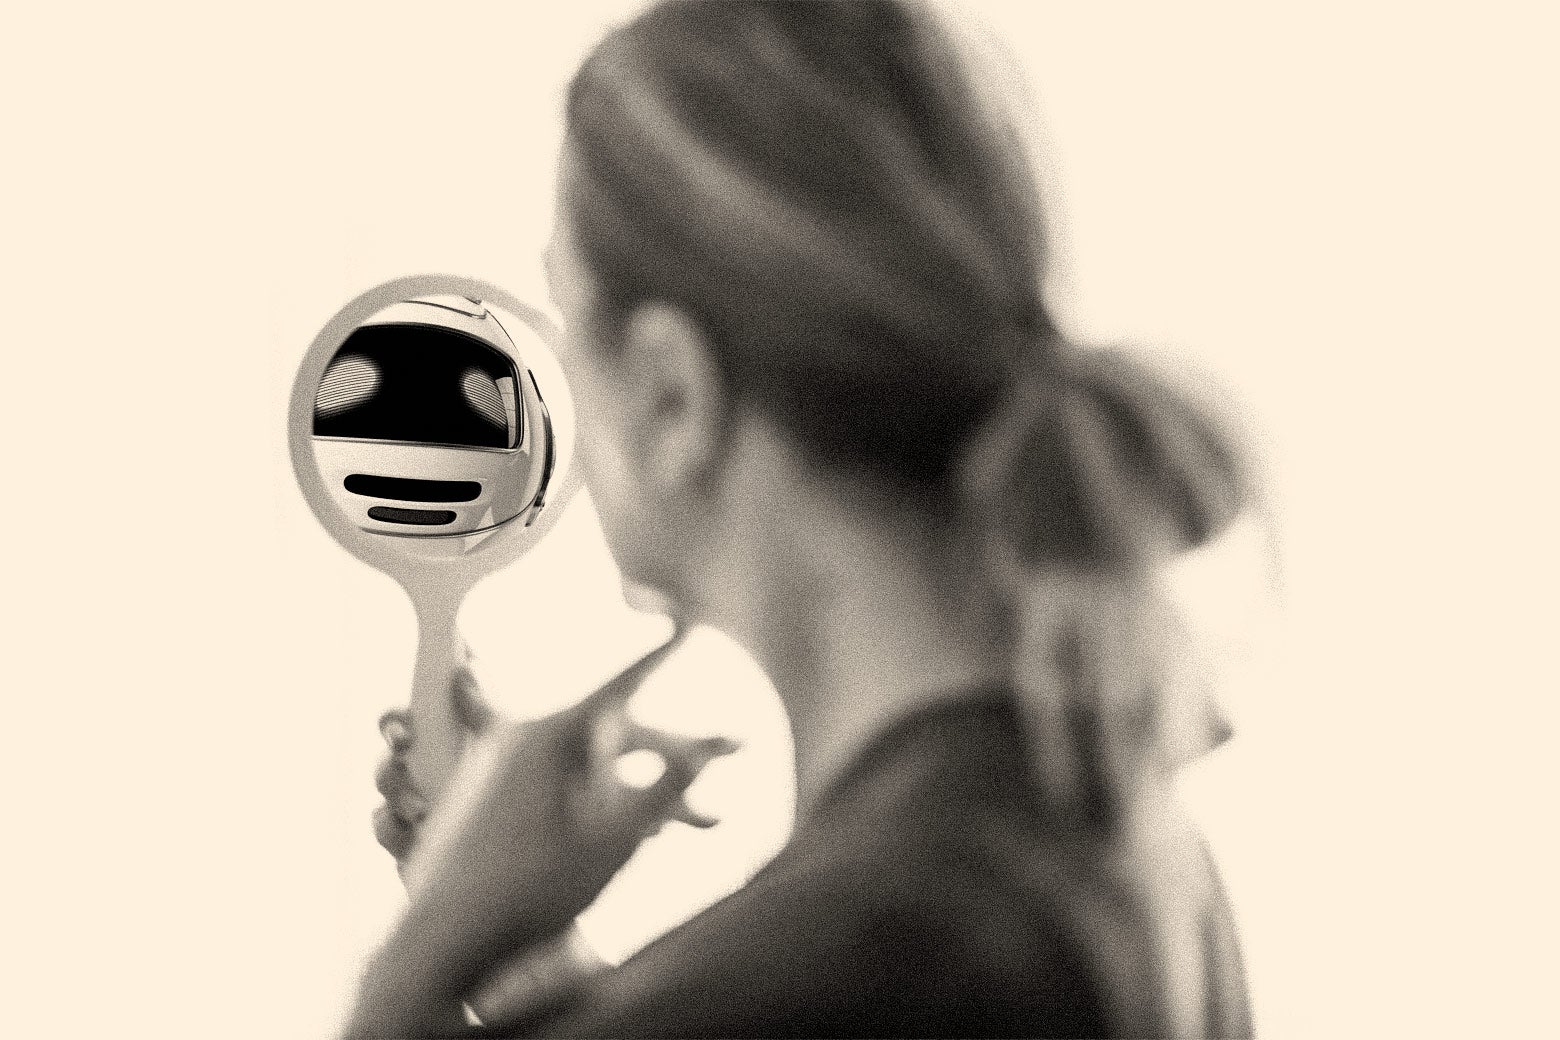 A woman holds up a hand mirror and a robot looks back at her.